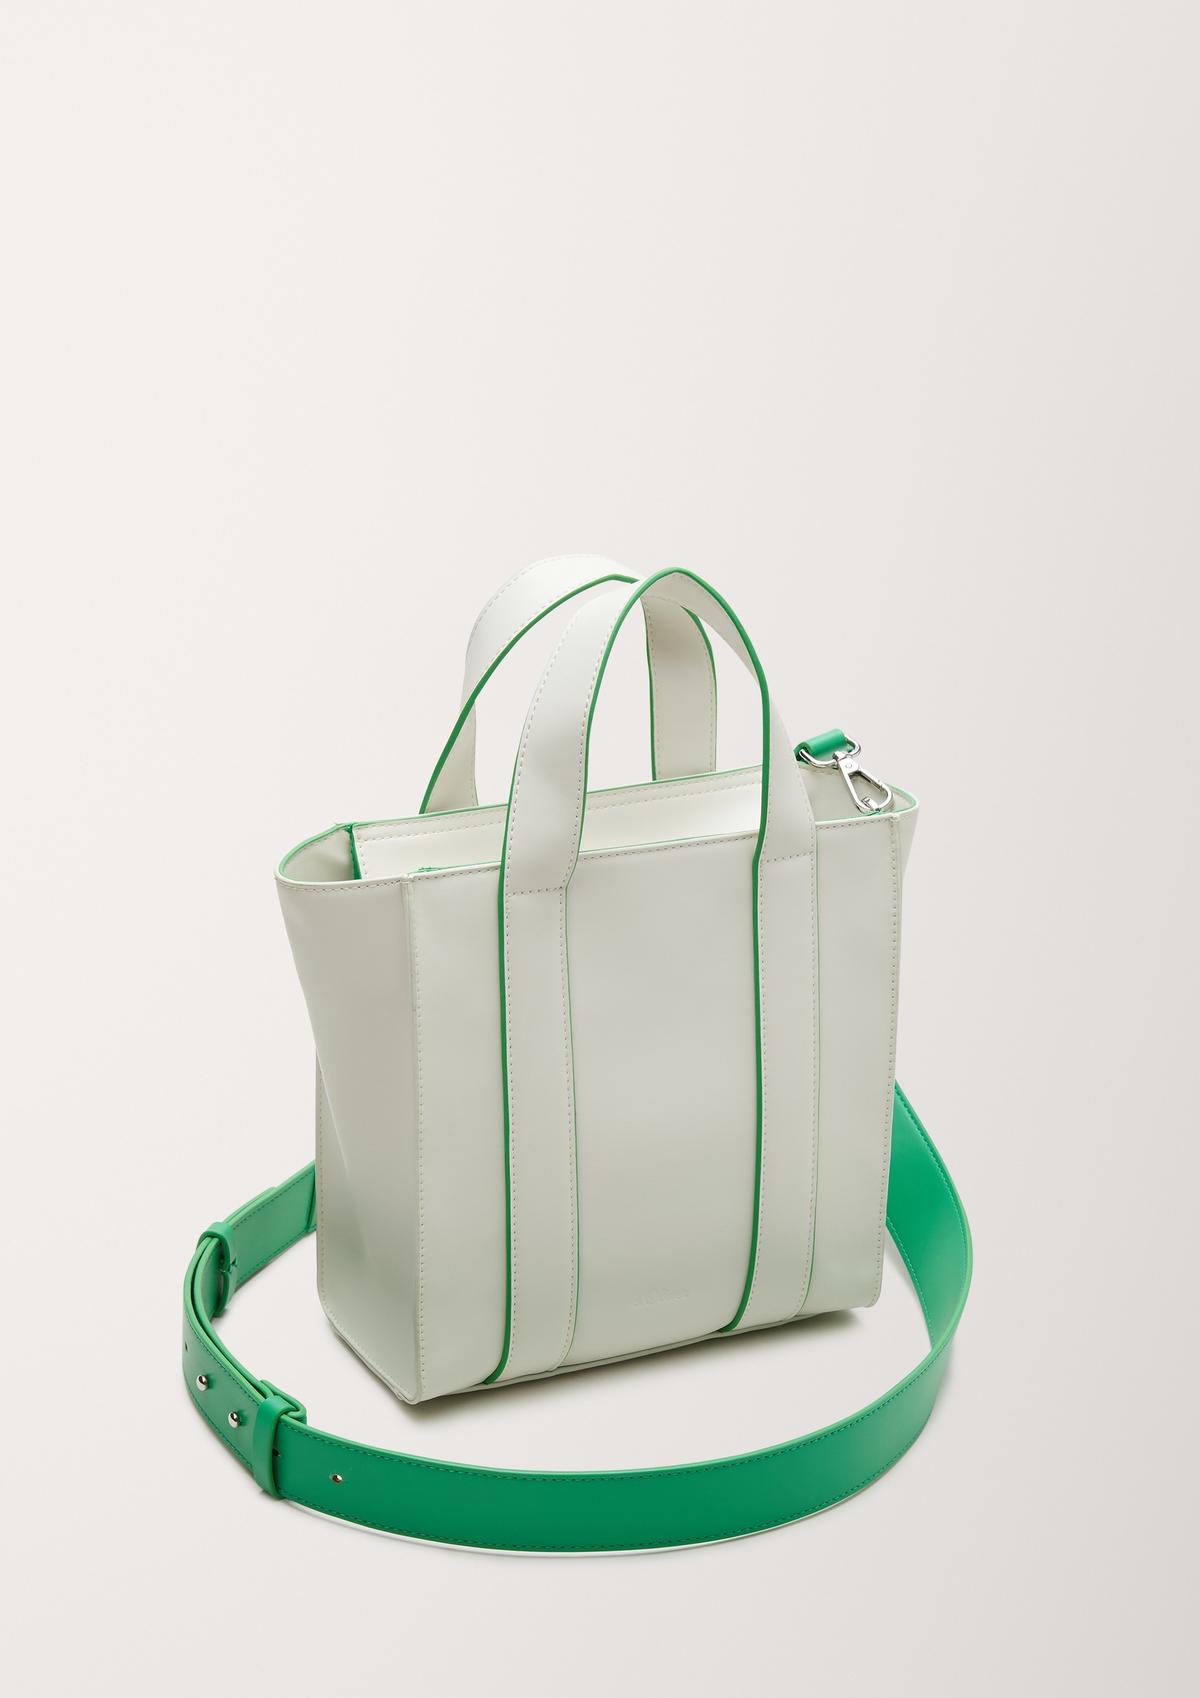 s.Oliver City bag with a detachable strap